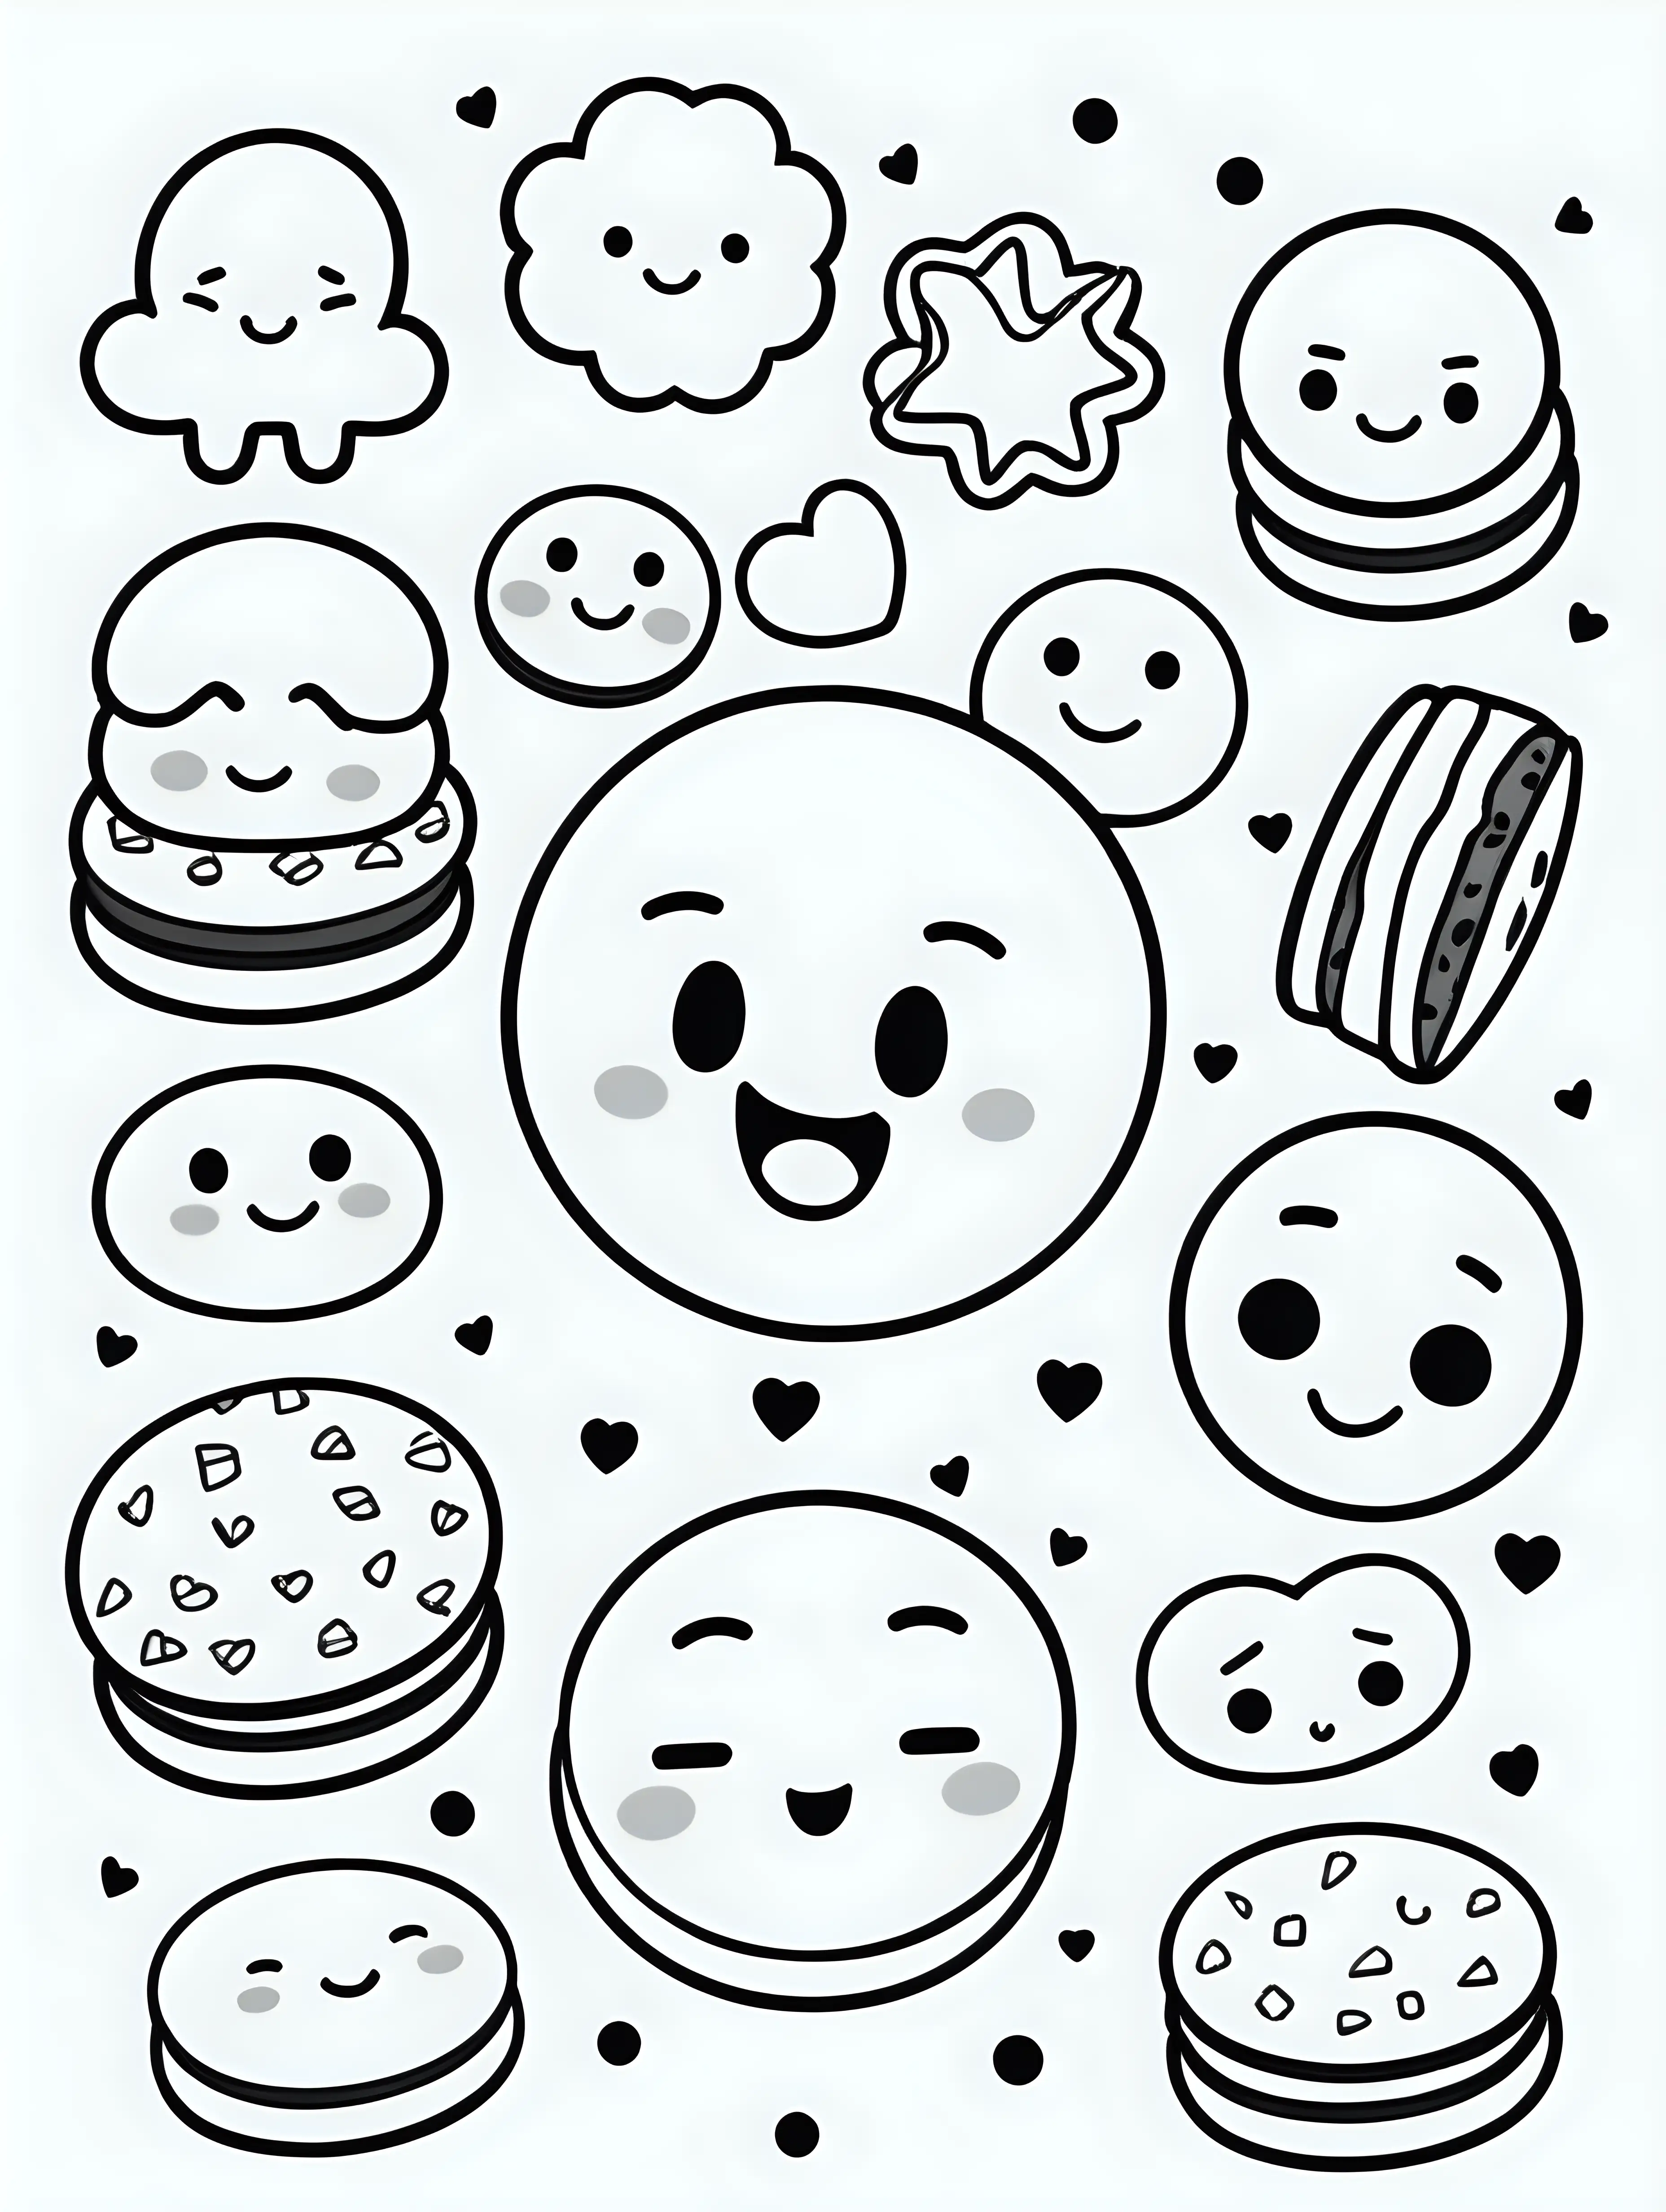 coloring book, cartoon drawing, clean black and white, single line, white background, cute cookies, emojis